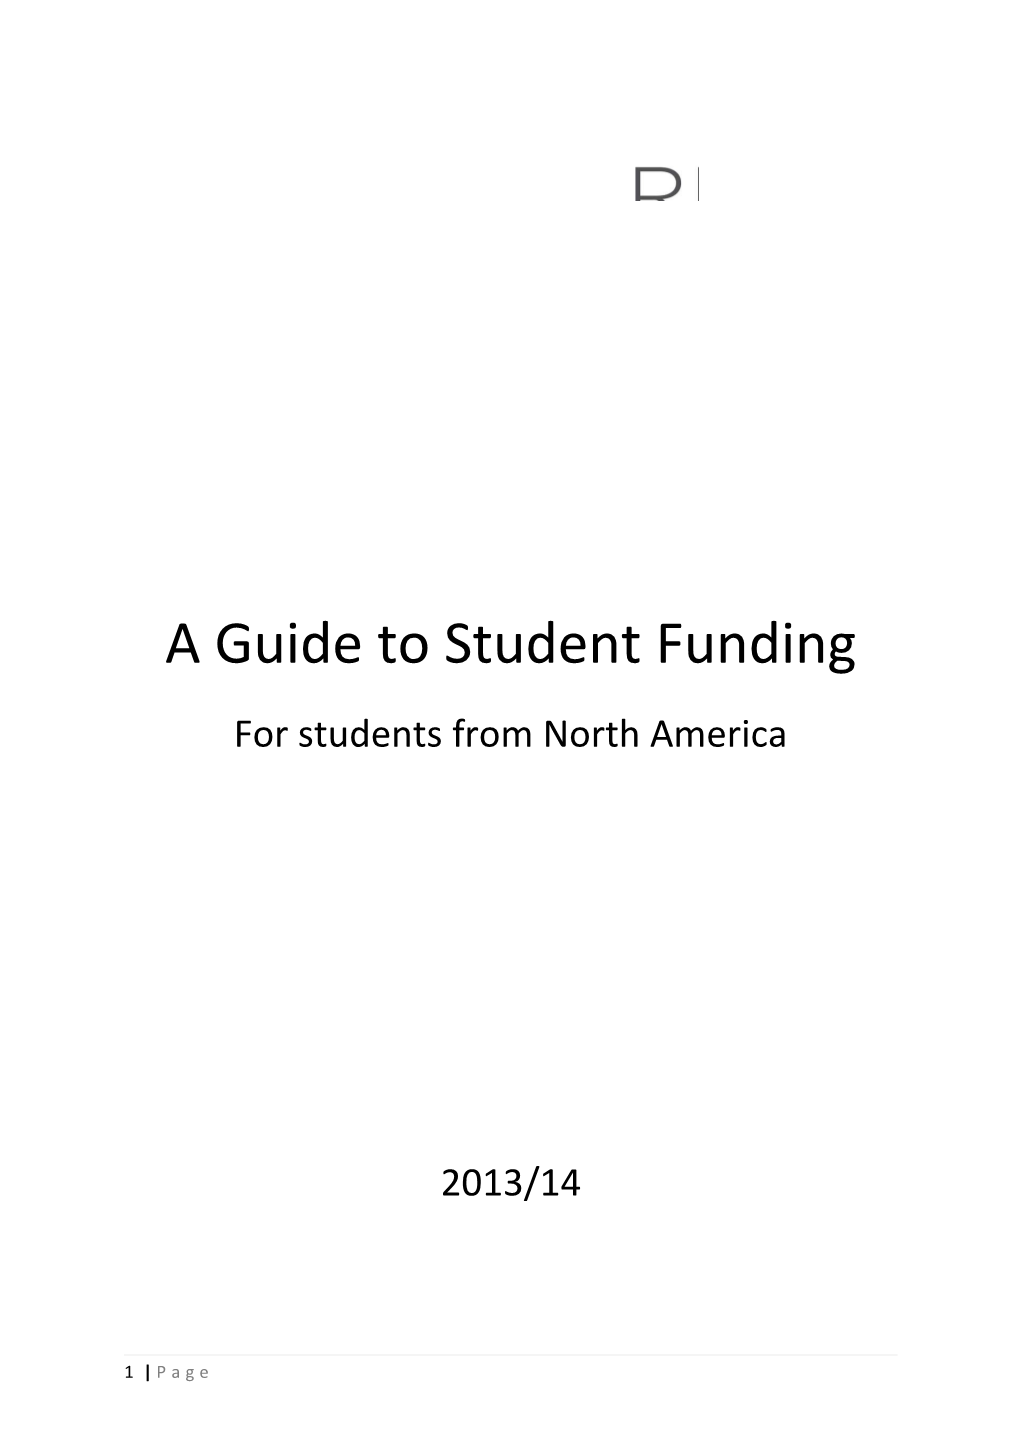 For Students from North America